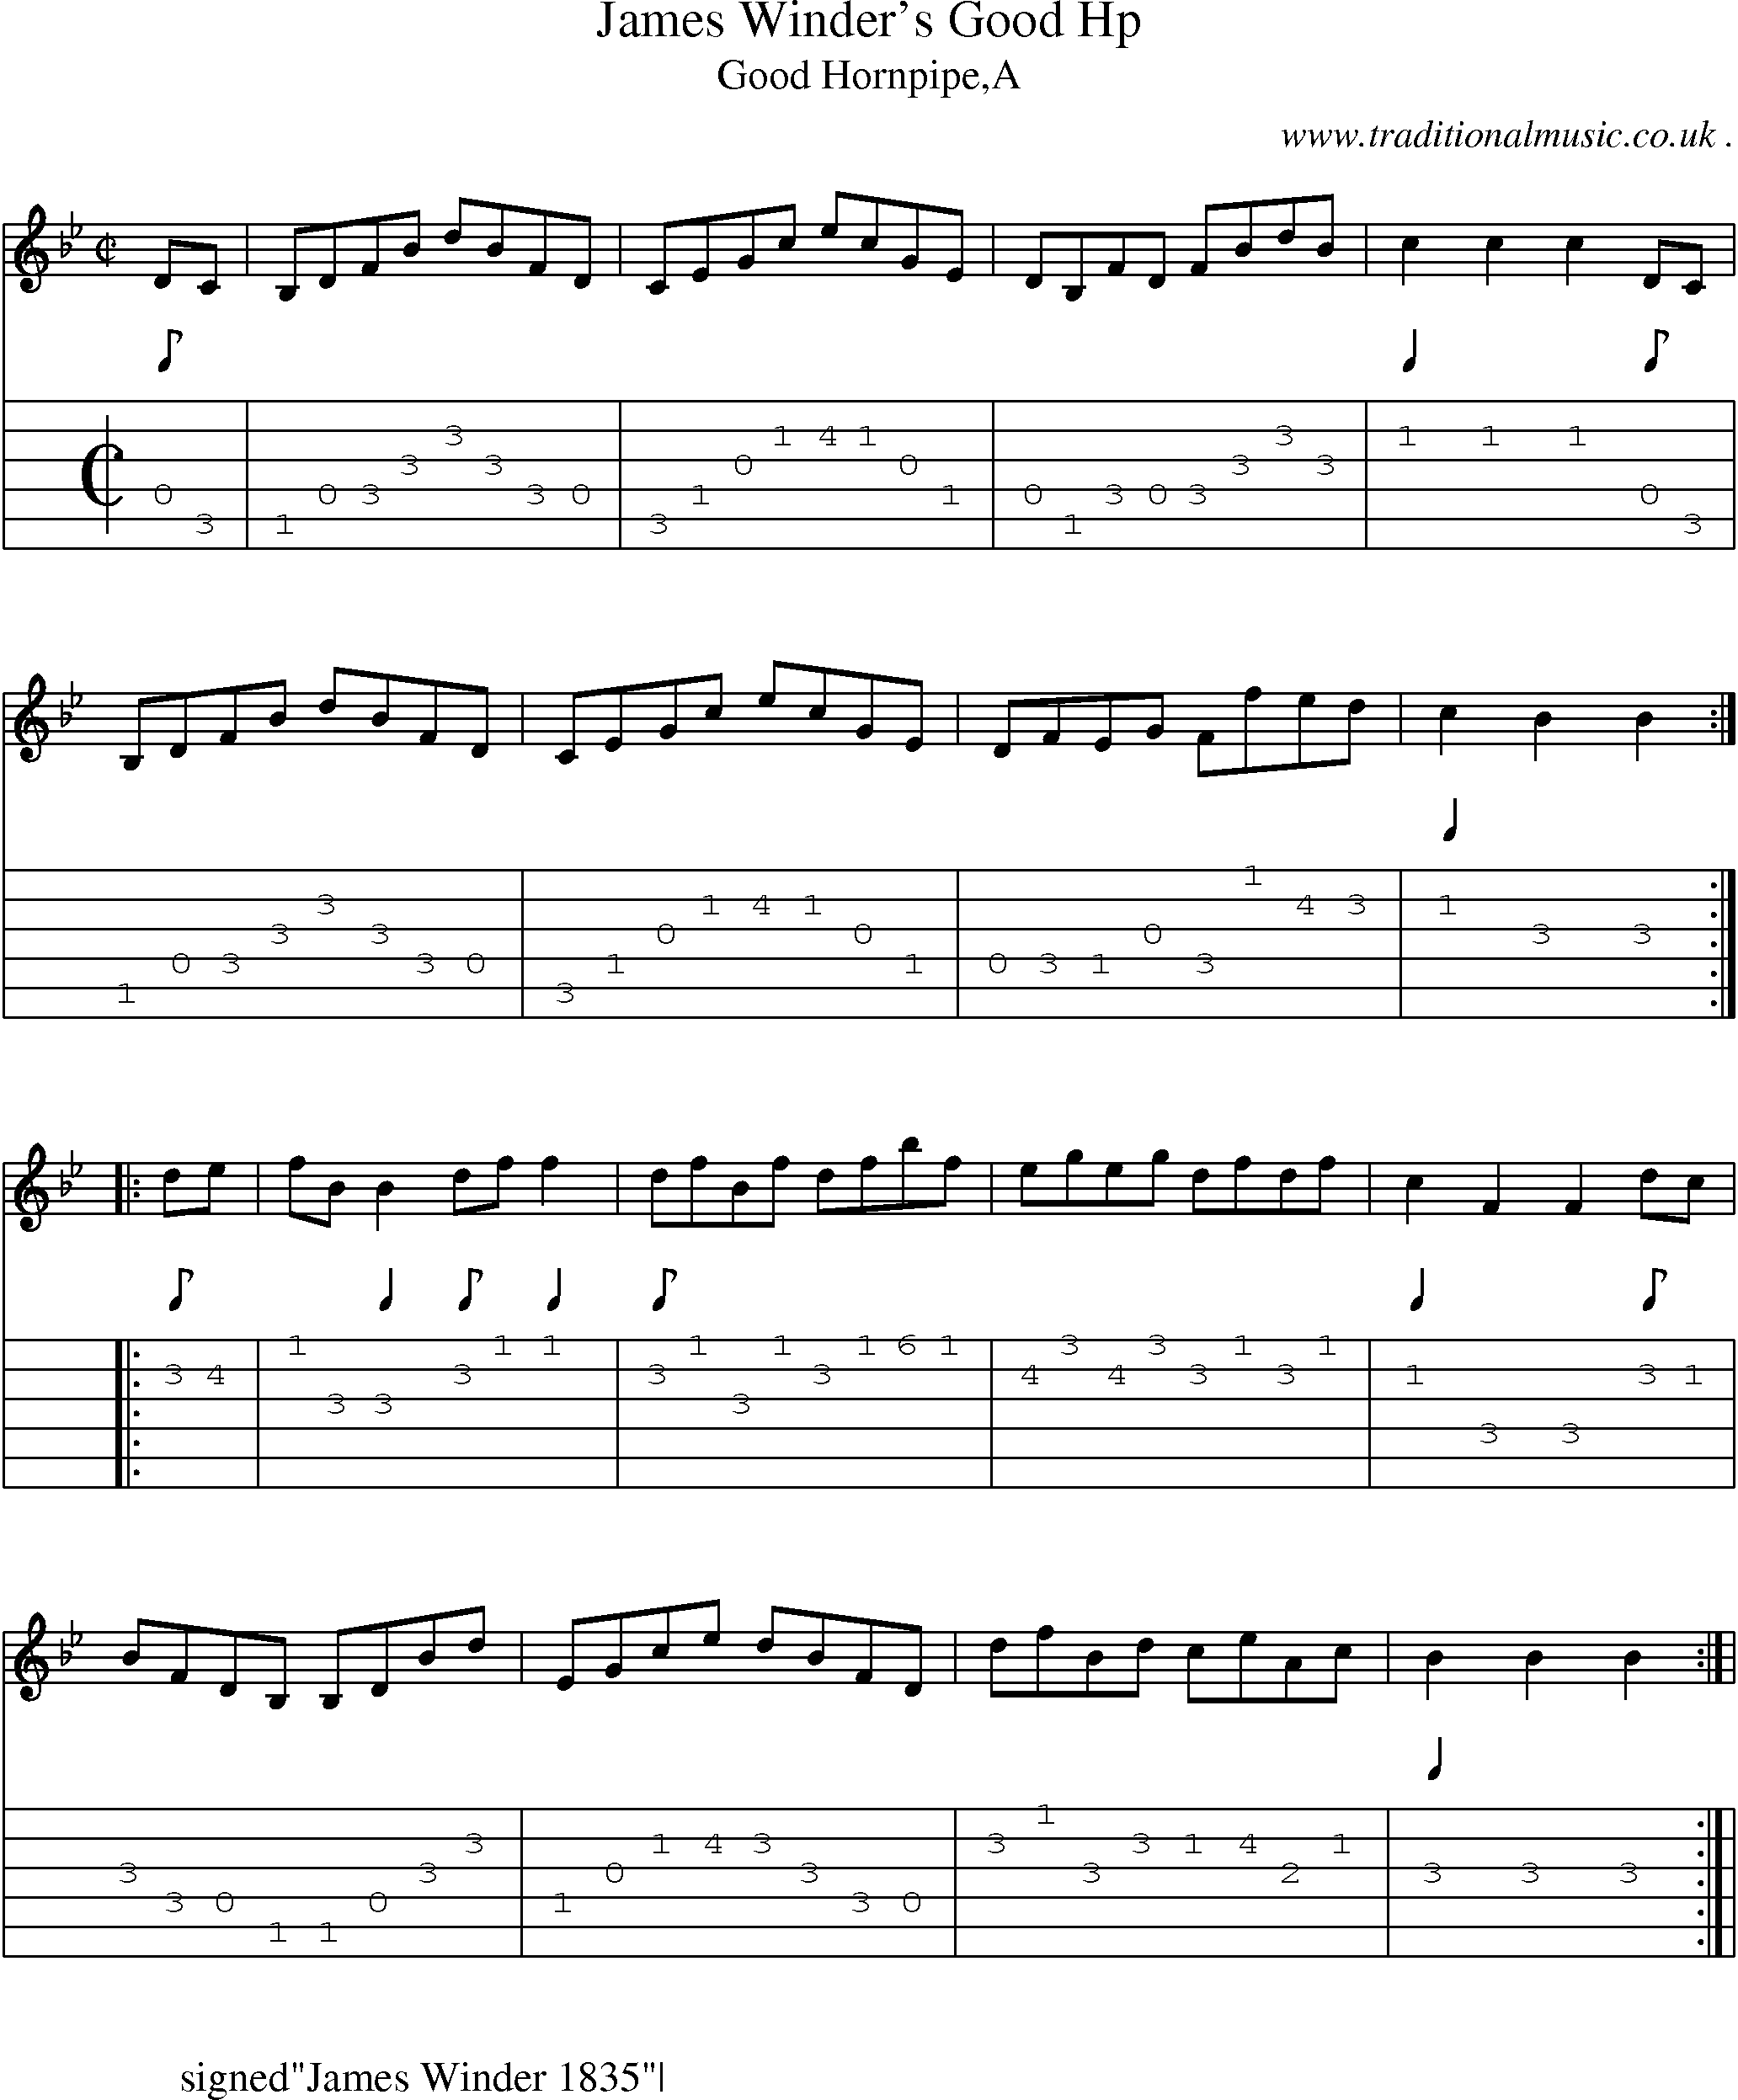 Sheet-Music and Guitar Tabs for James Winders Good Hp